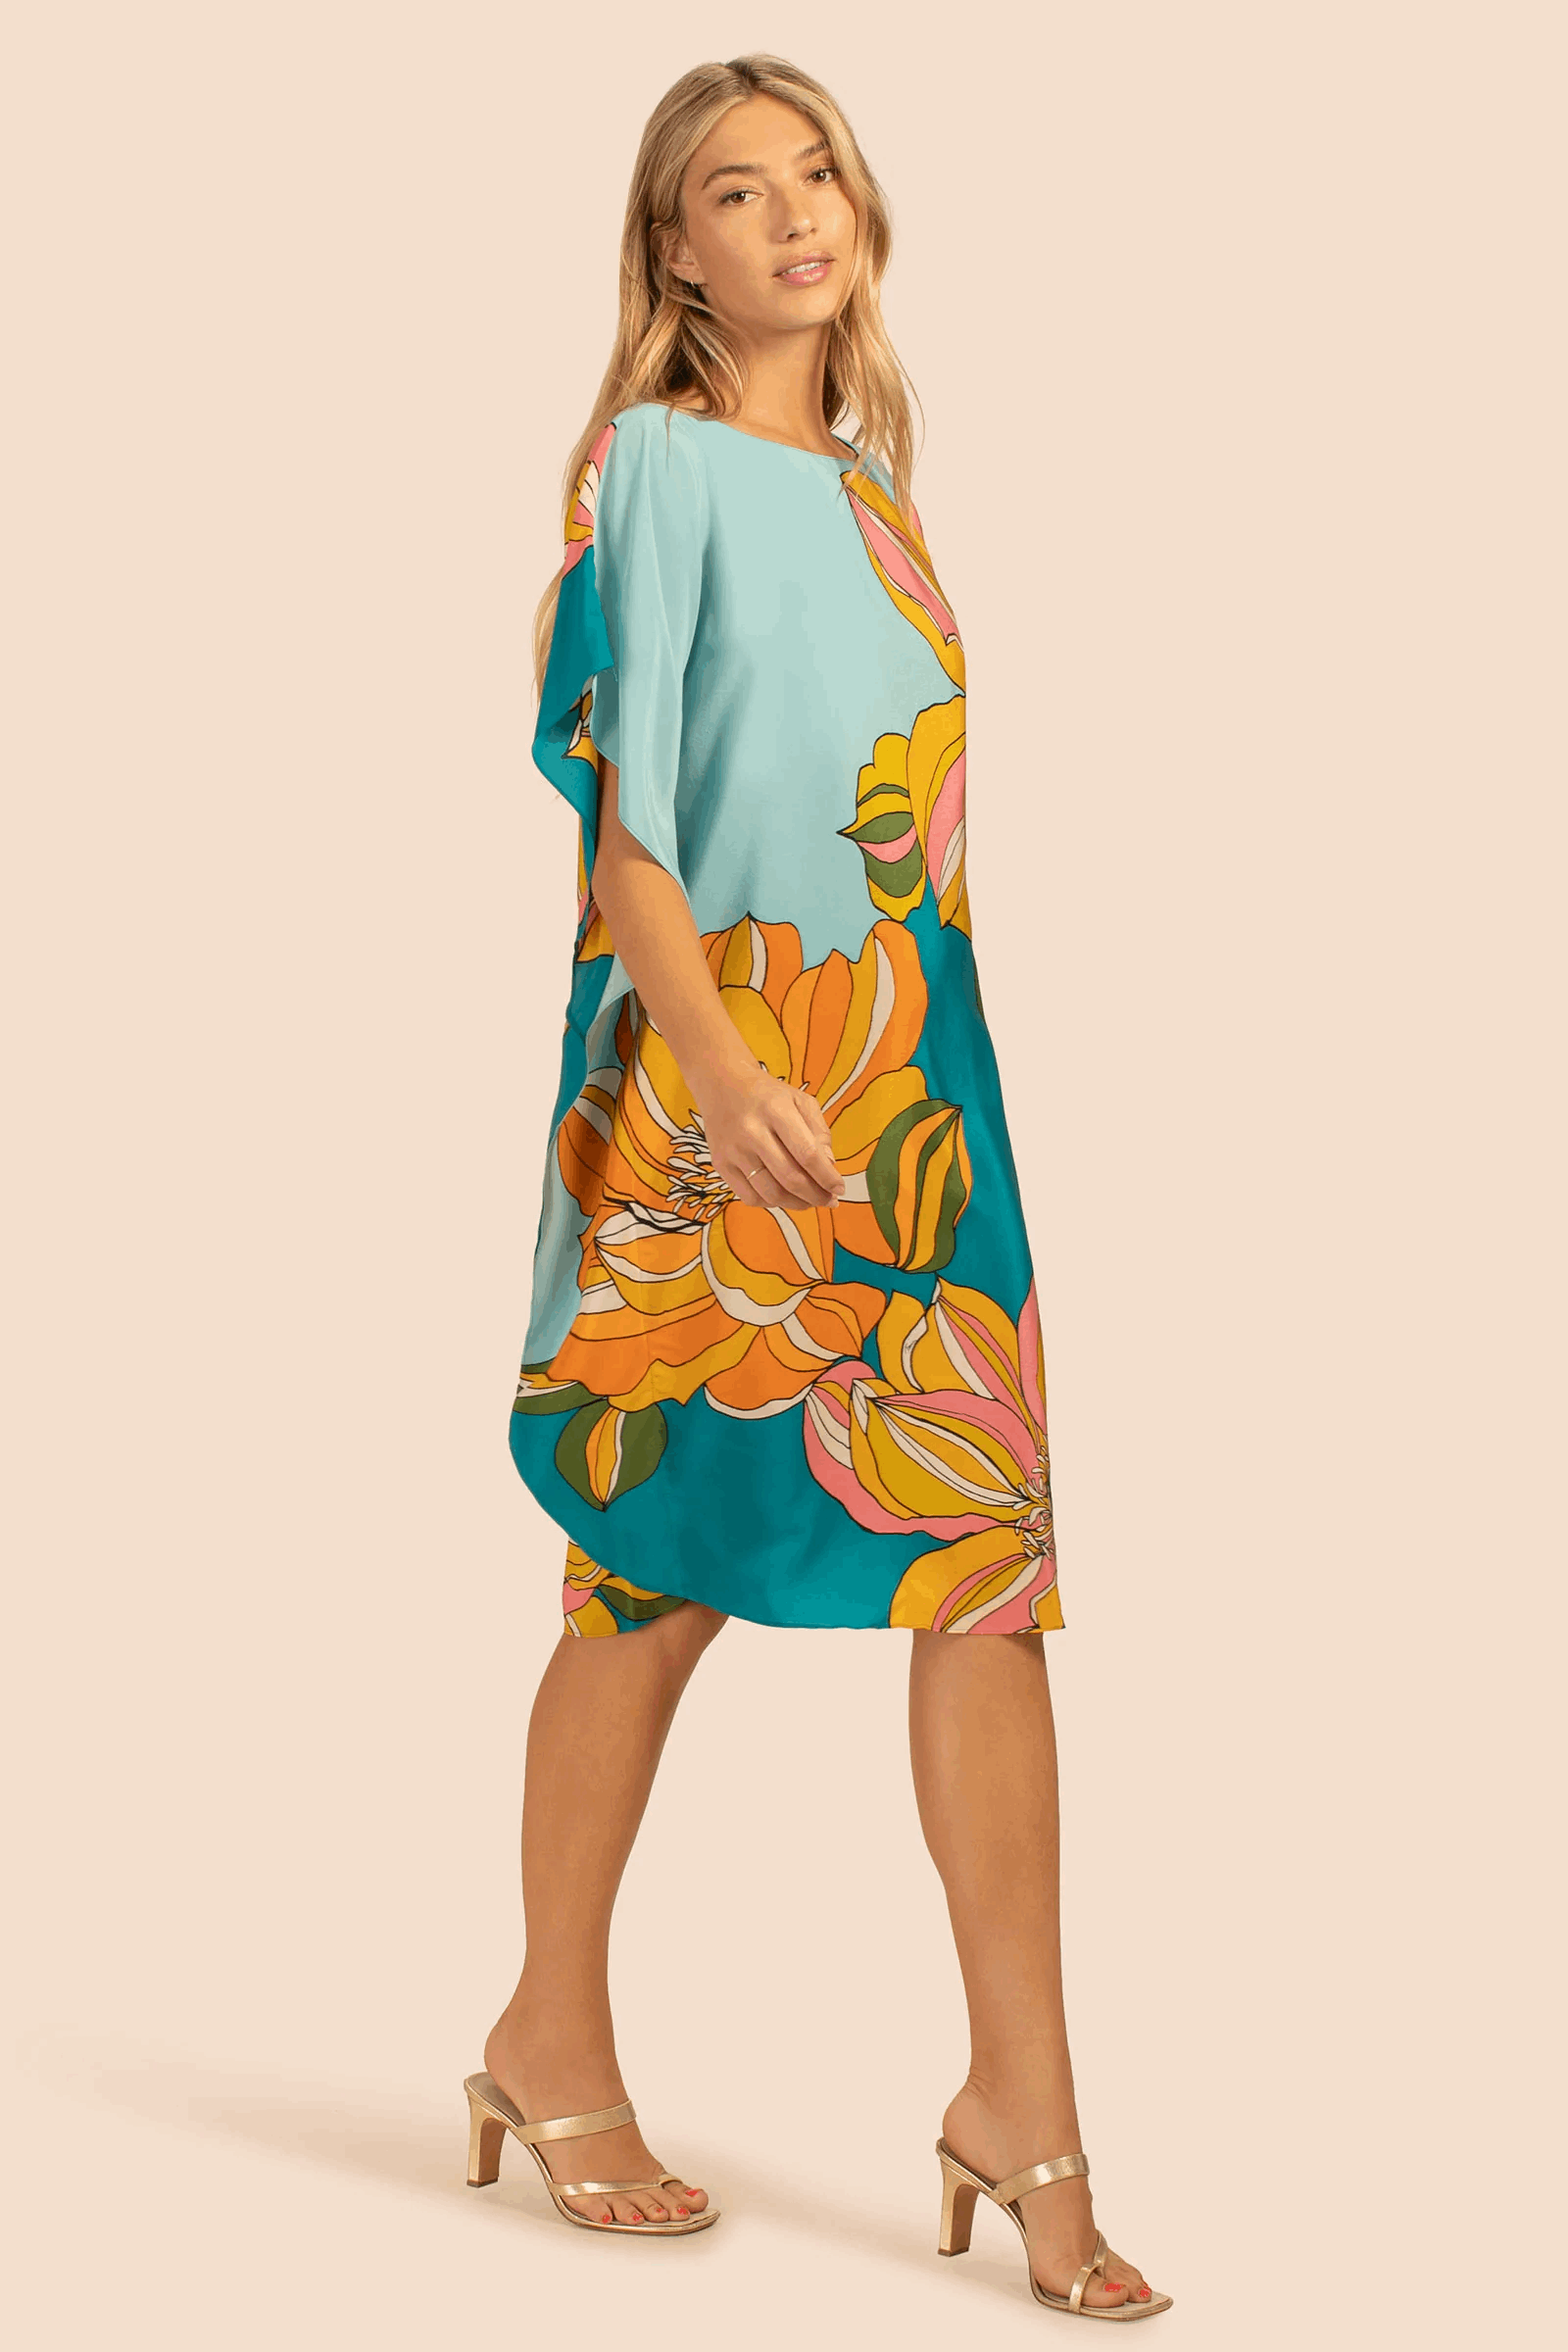 The model in the image is wearing Floral Printed Soft Silk Crepe Womens Kaftan from Alice Milan. Crafted with the finest materials and impeccable attention to detail, the Kaftan / Dress looks premium, trendy, luxurious and offers unparalleled comfort. It’s a perfect clothing option for loungewear, resort wear, party wear or for an airport look. The woman in the image looks happy, and confident with her style statement putting a happy smile on her face.